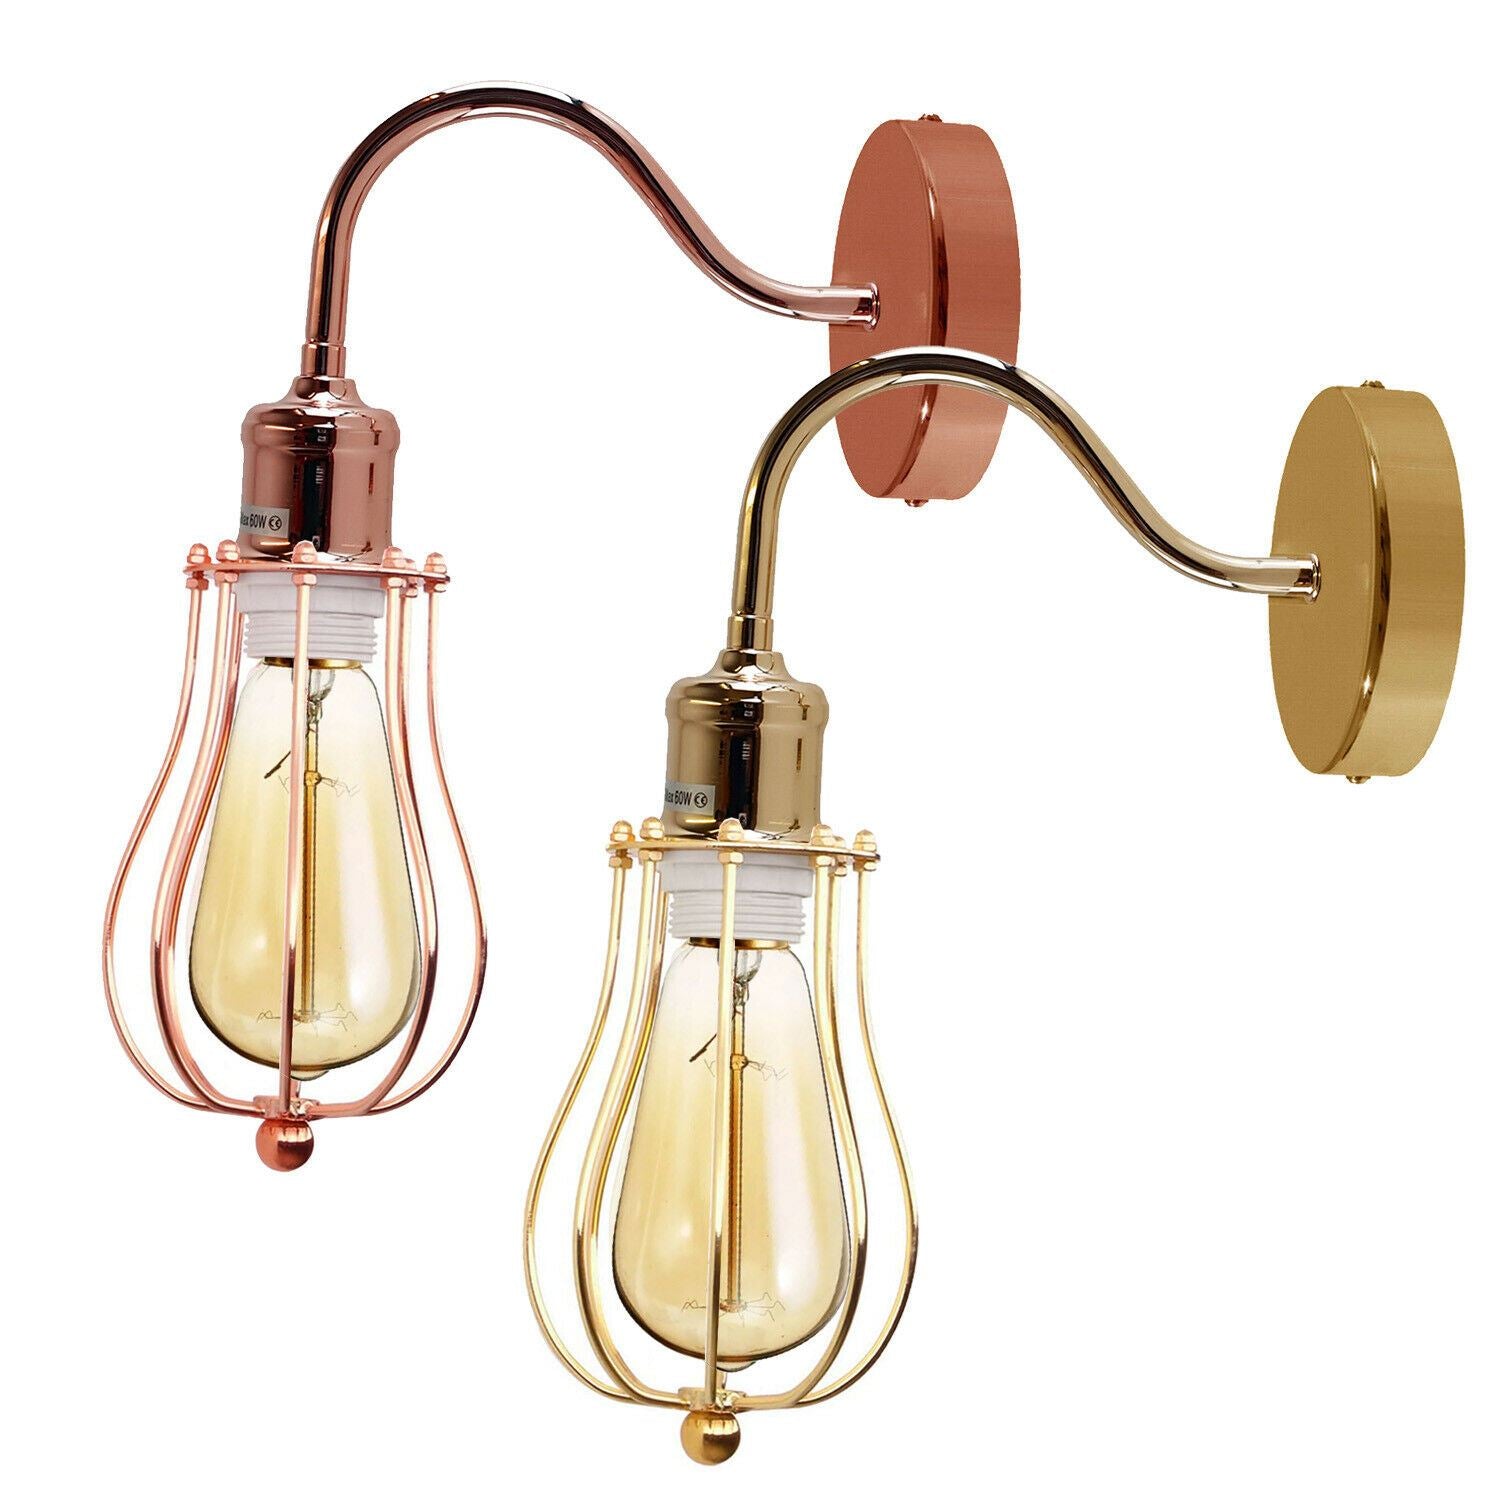 Modern Industrial Wall Mounted Light Indoor Rustic Sconce Lamp Fixture Metal Balloon Cage Shade for Bed room, Living Room Kitchen~1189 - LEDSone UK Ltd